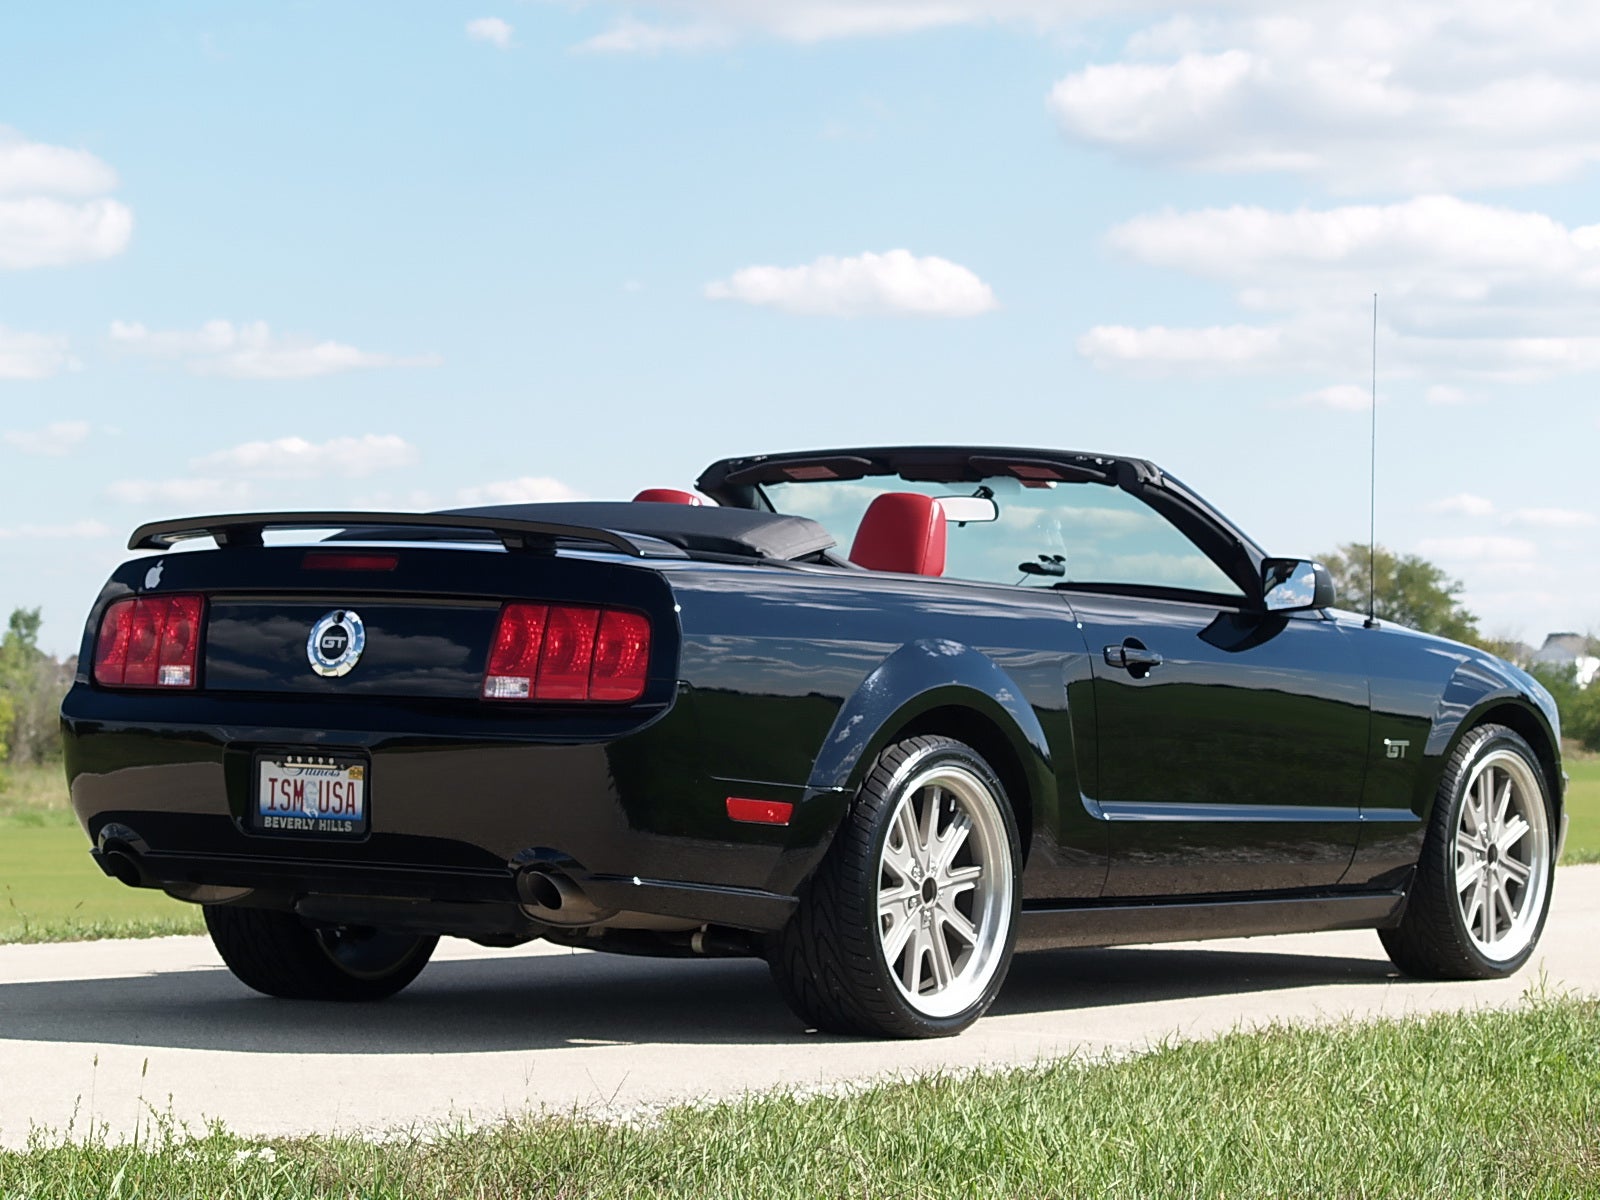 Dimensions 2005 ford mustang convertible #10